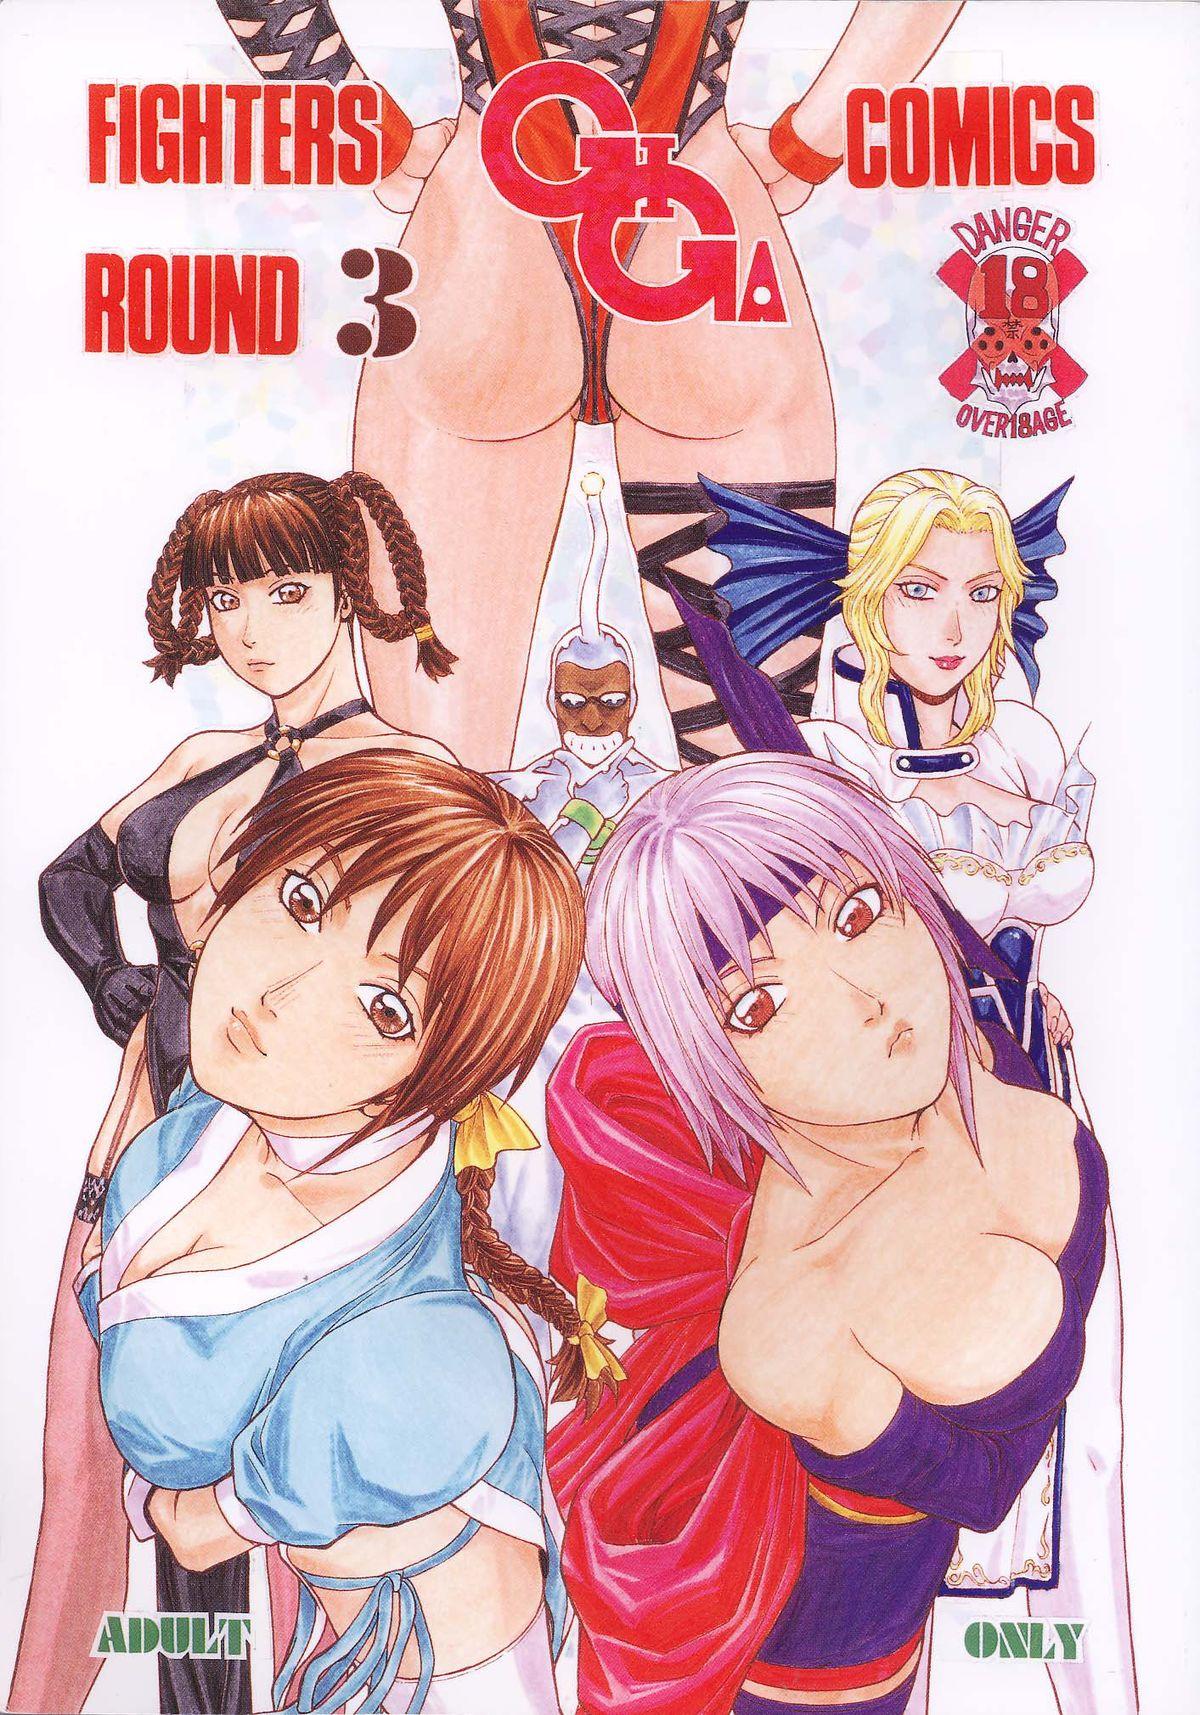 Job Fighters Giga Comics Round 3 - Street fighter Dead or alive Soulcalibur Smooth - Page 1